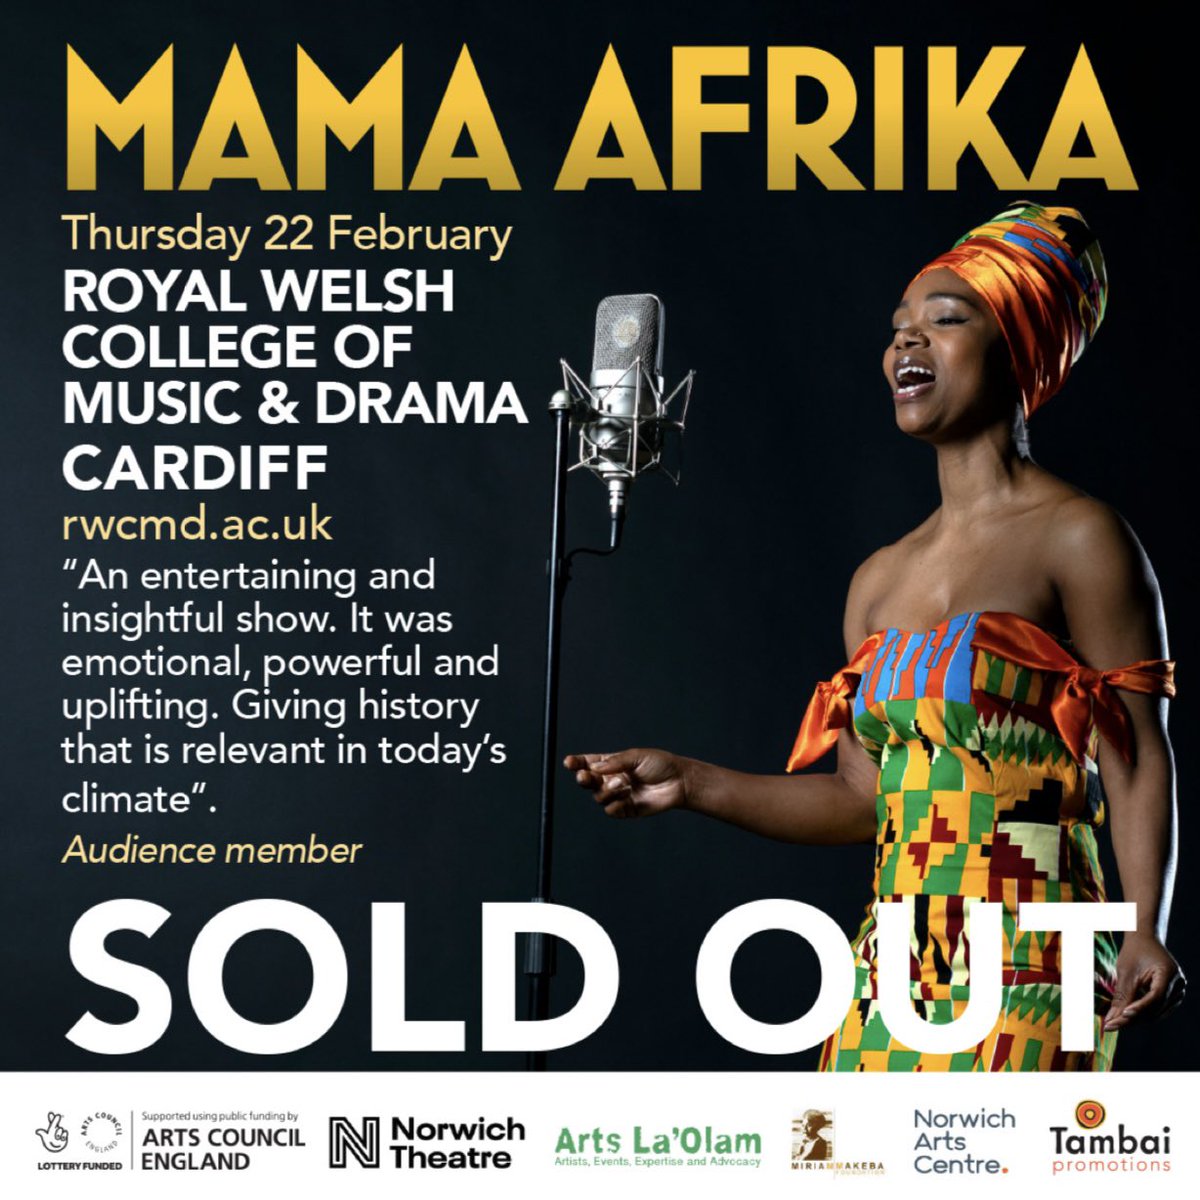 So thrilled to be heading to Cardiff this week for another sold out show!🎉🎉🎉

#AnnaMudeka #MamaAfrika  #MamaAfrika2024 #MamaAfrikaTourm  #MiriamMakeba #Zimbabwe #SouthAfrica #ArtsCouncilEngland #AceSupported #LetsCreate  #LiveTheatre  #LocalTheatre #UKBlackArts #BlackTheatre